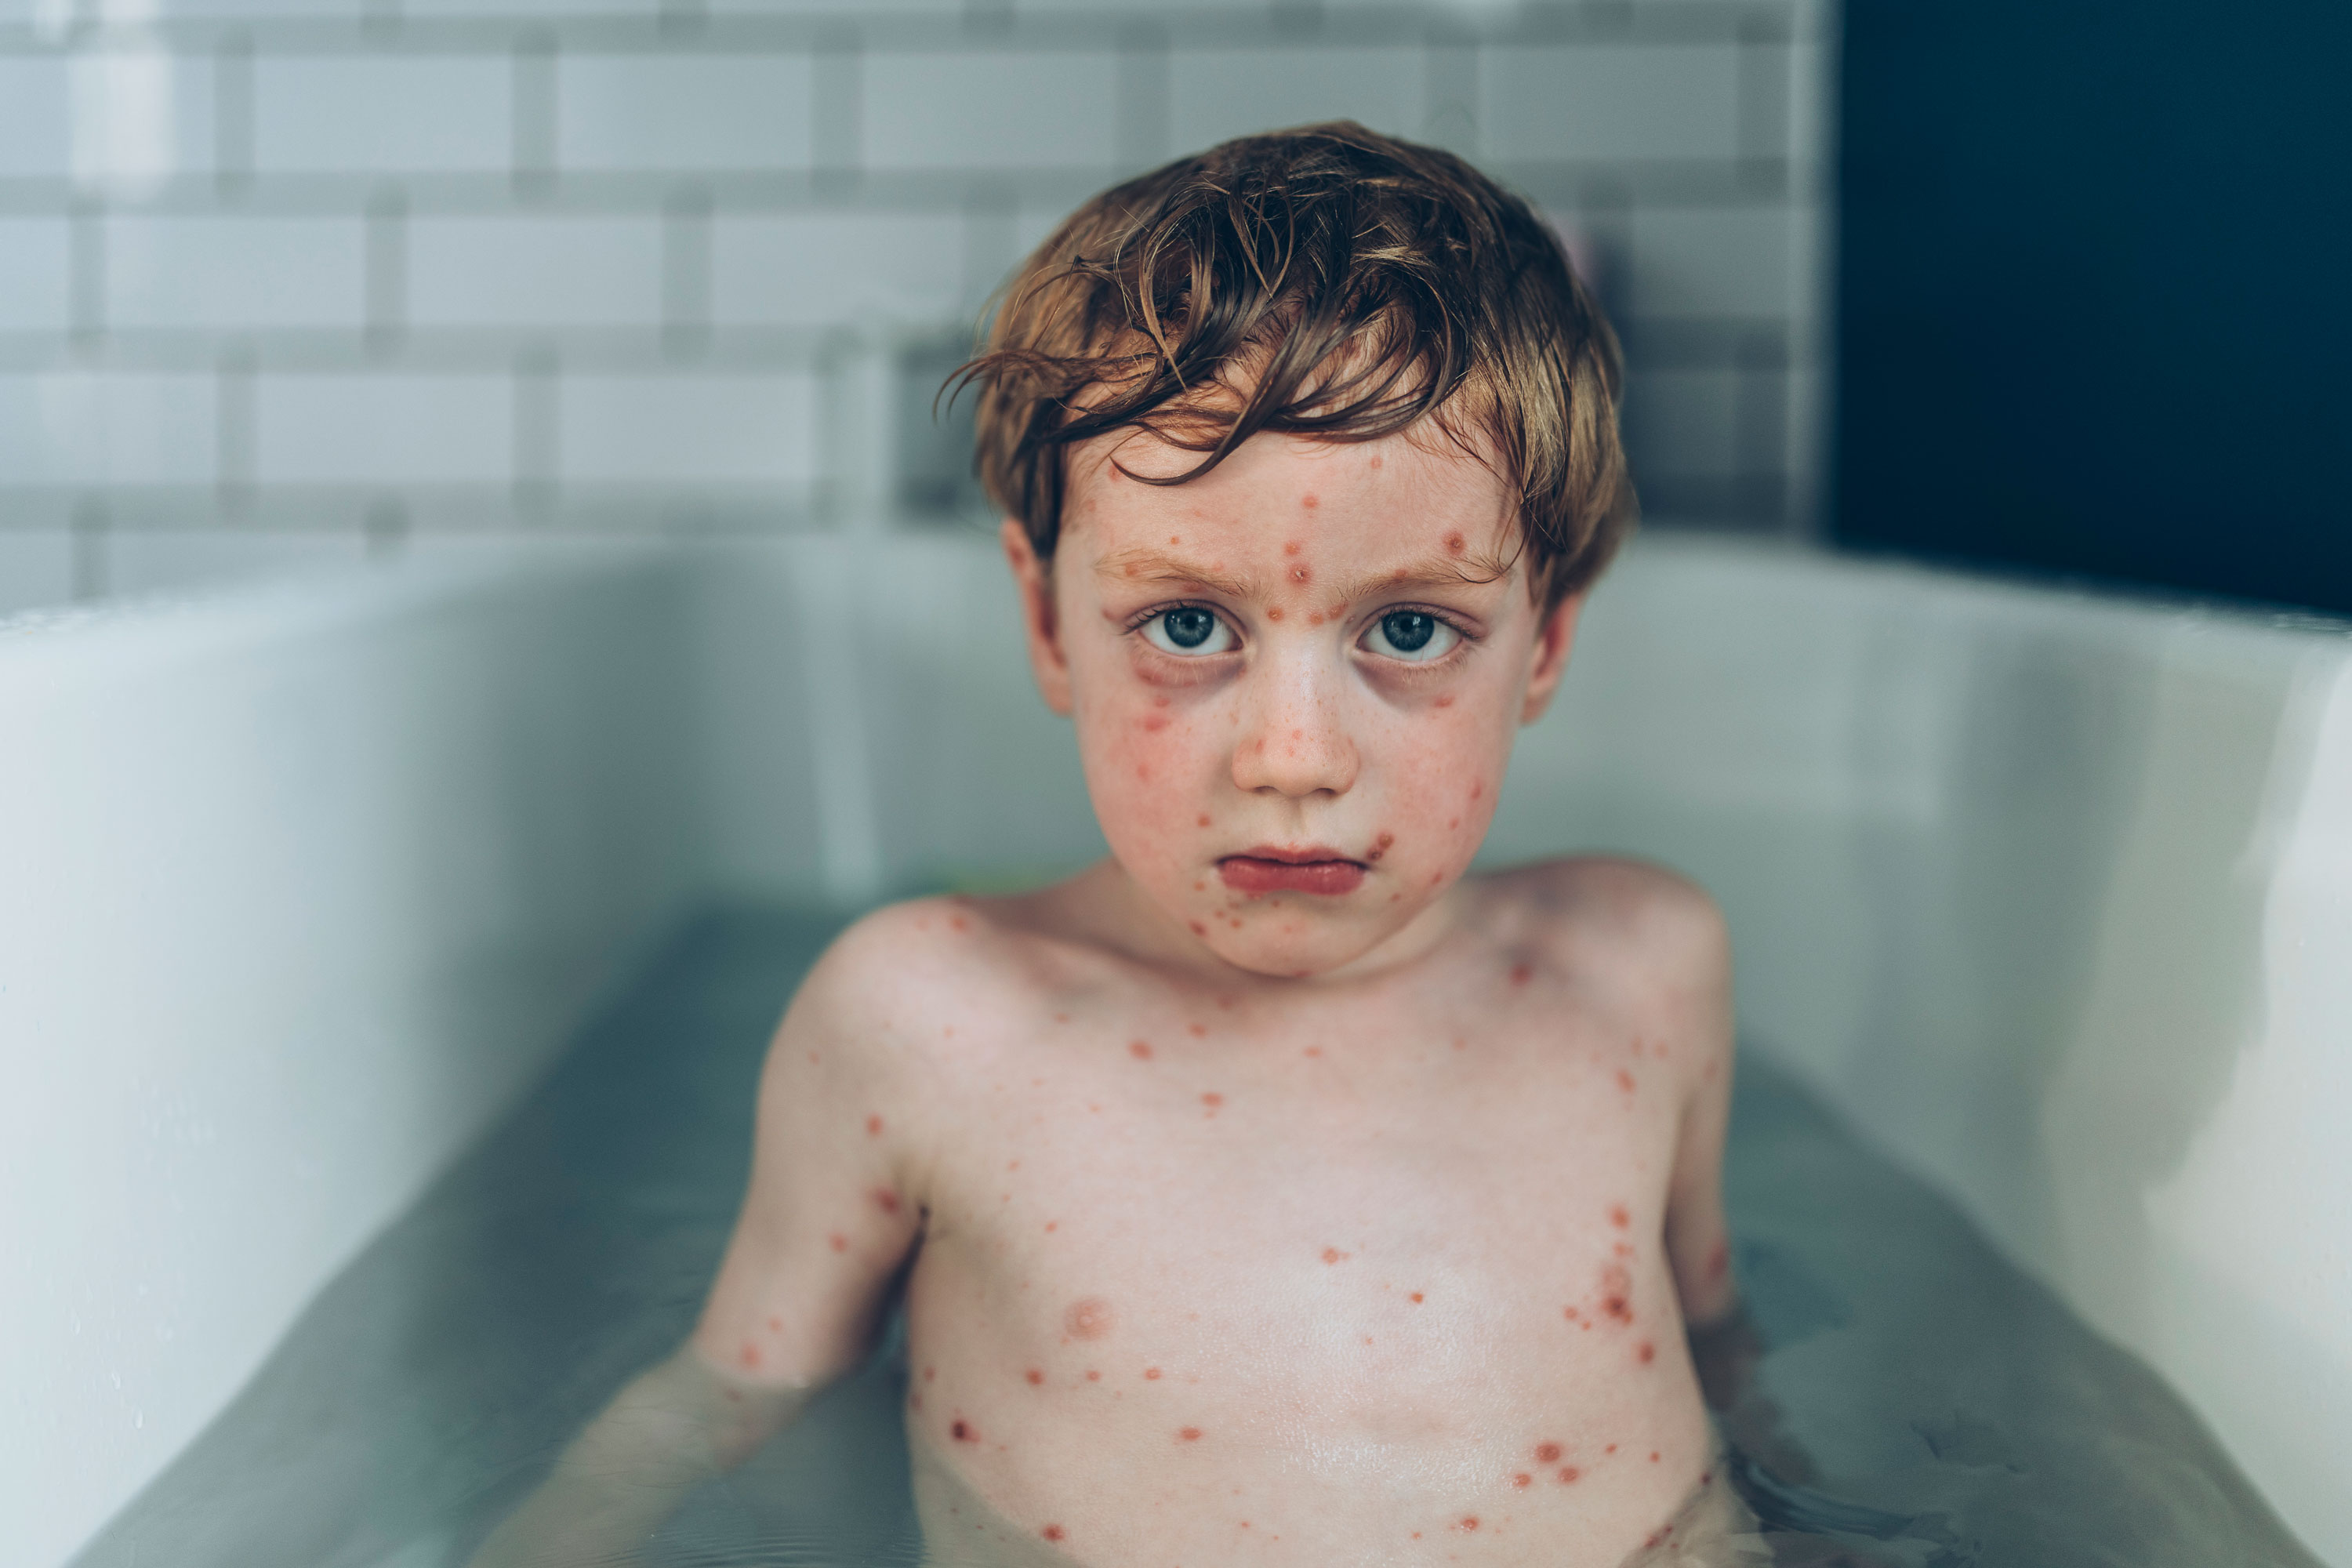 A young boy with chickenpox sits in the bath